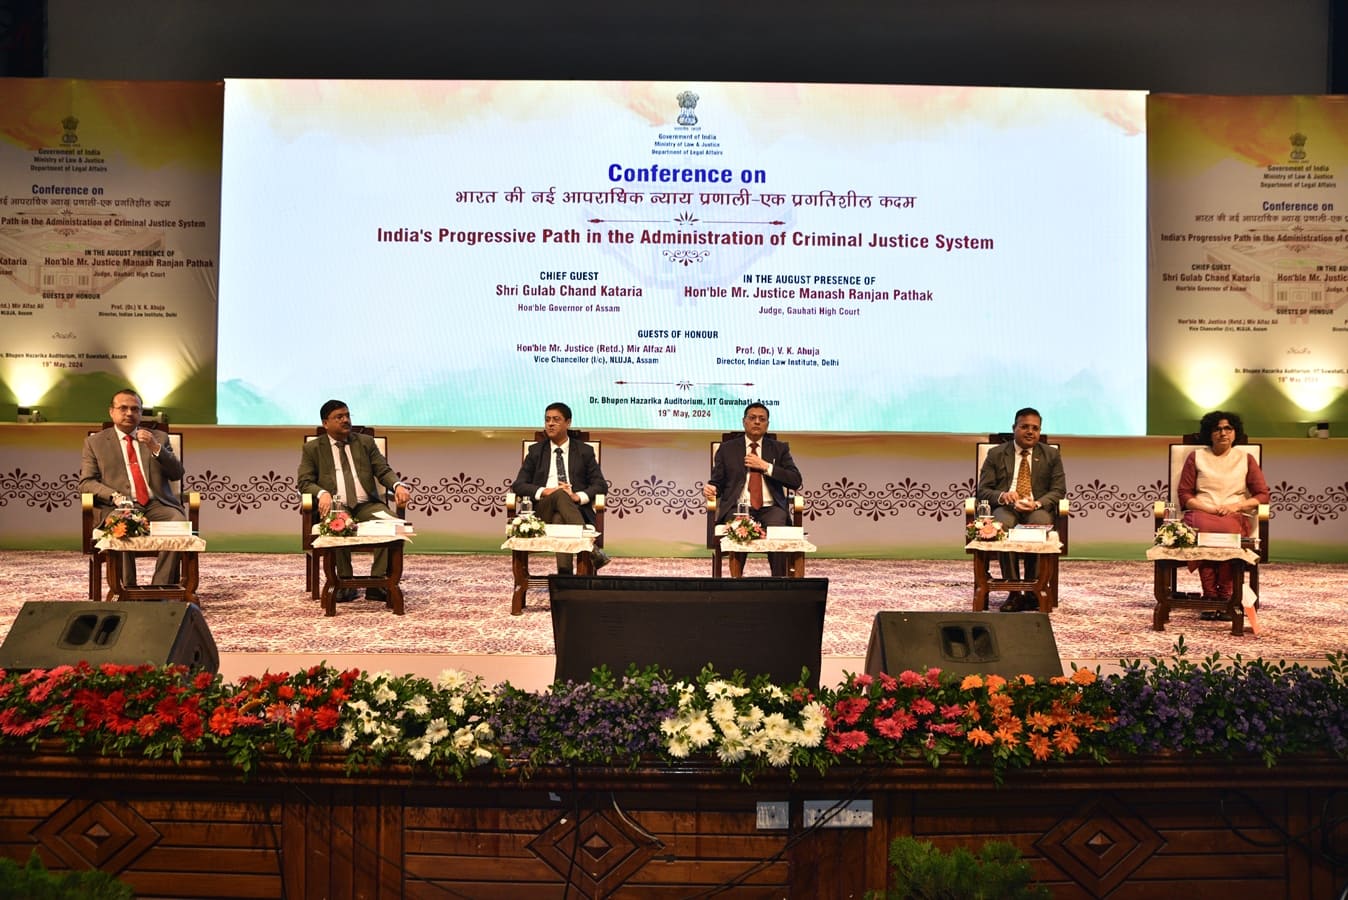 Conference on India's Progressive Path in the Administration of Criminal Justice System